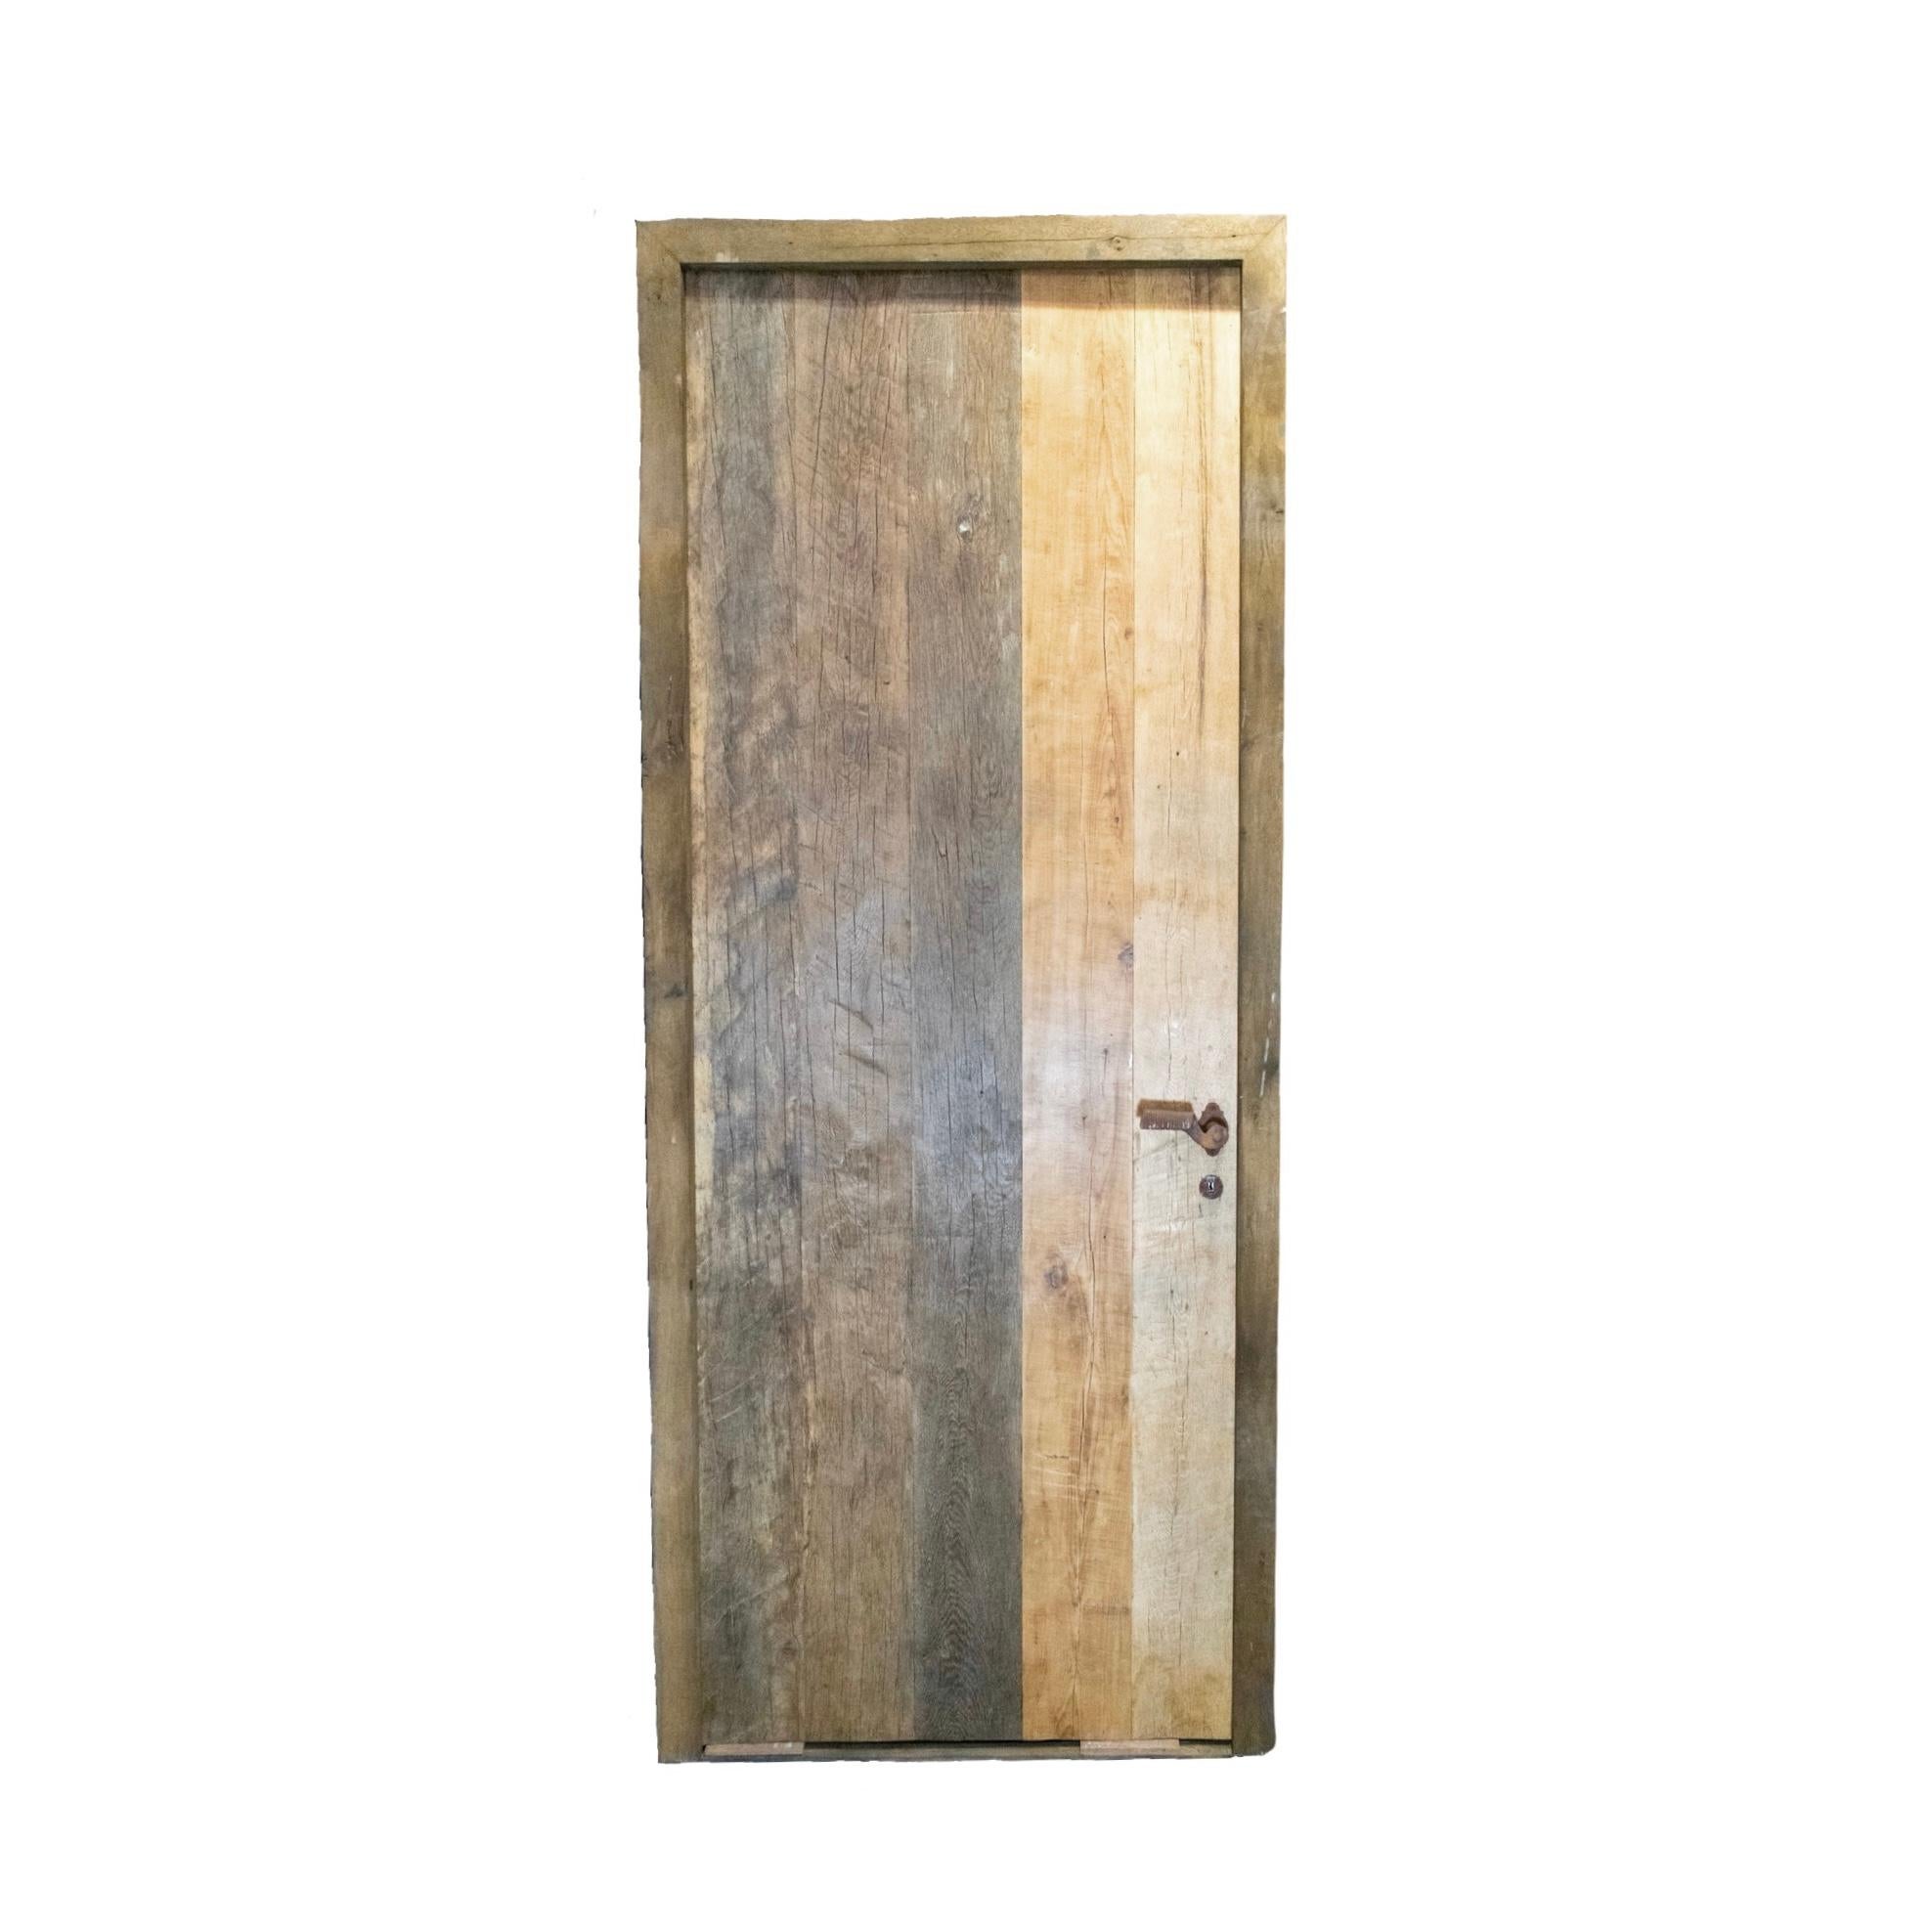 A reclaimed door made out of newly constructed Oakwood. Door Lock ready and with key. Circa, 18th century. 

Reclaimed rustic doors are doors made from used materials that have been refurbished and given a new purpose. They often have a rustic or